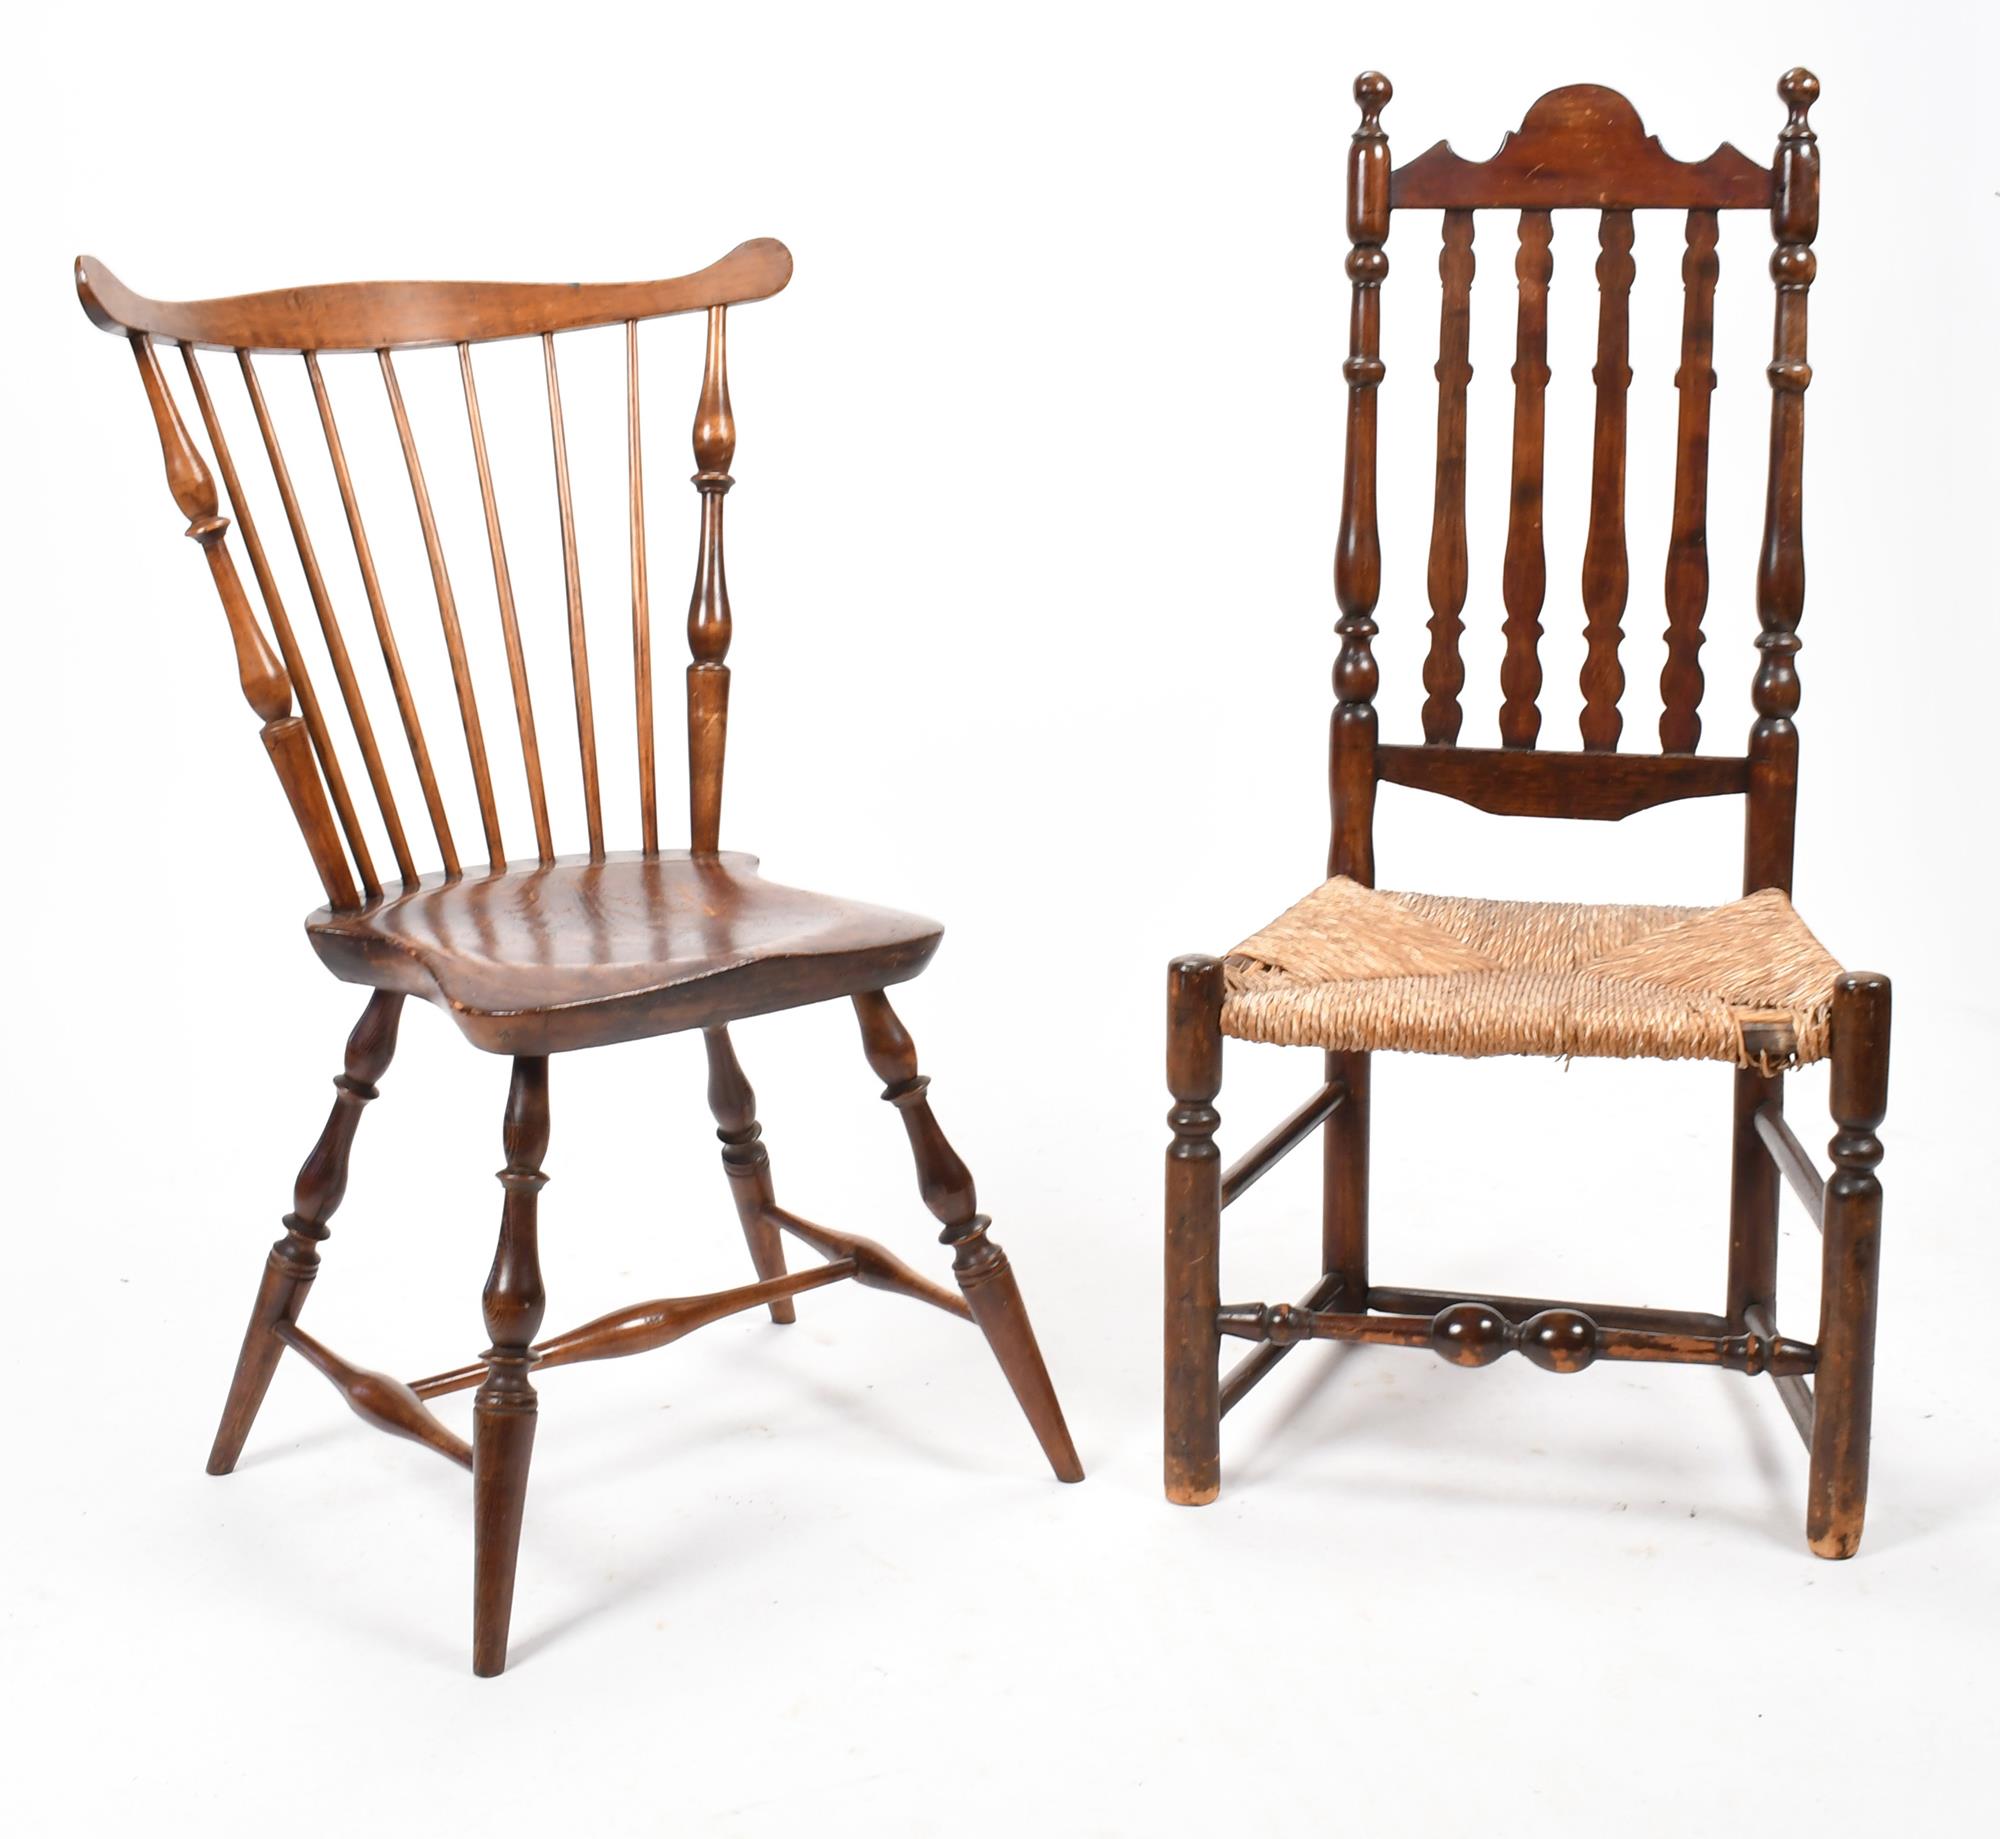 TWO 18TH C. AMERICAN CHAIRS. A